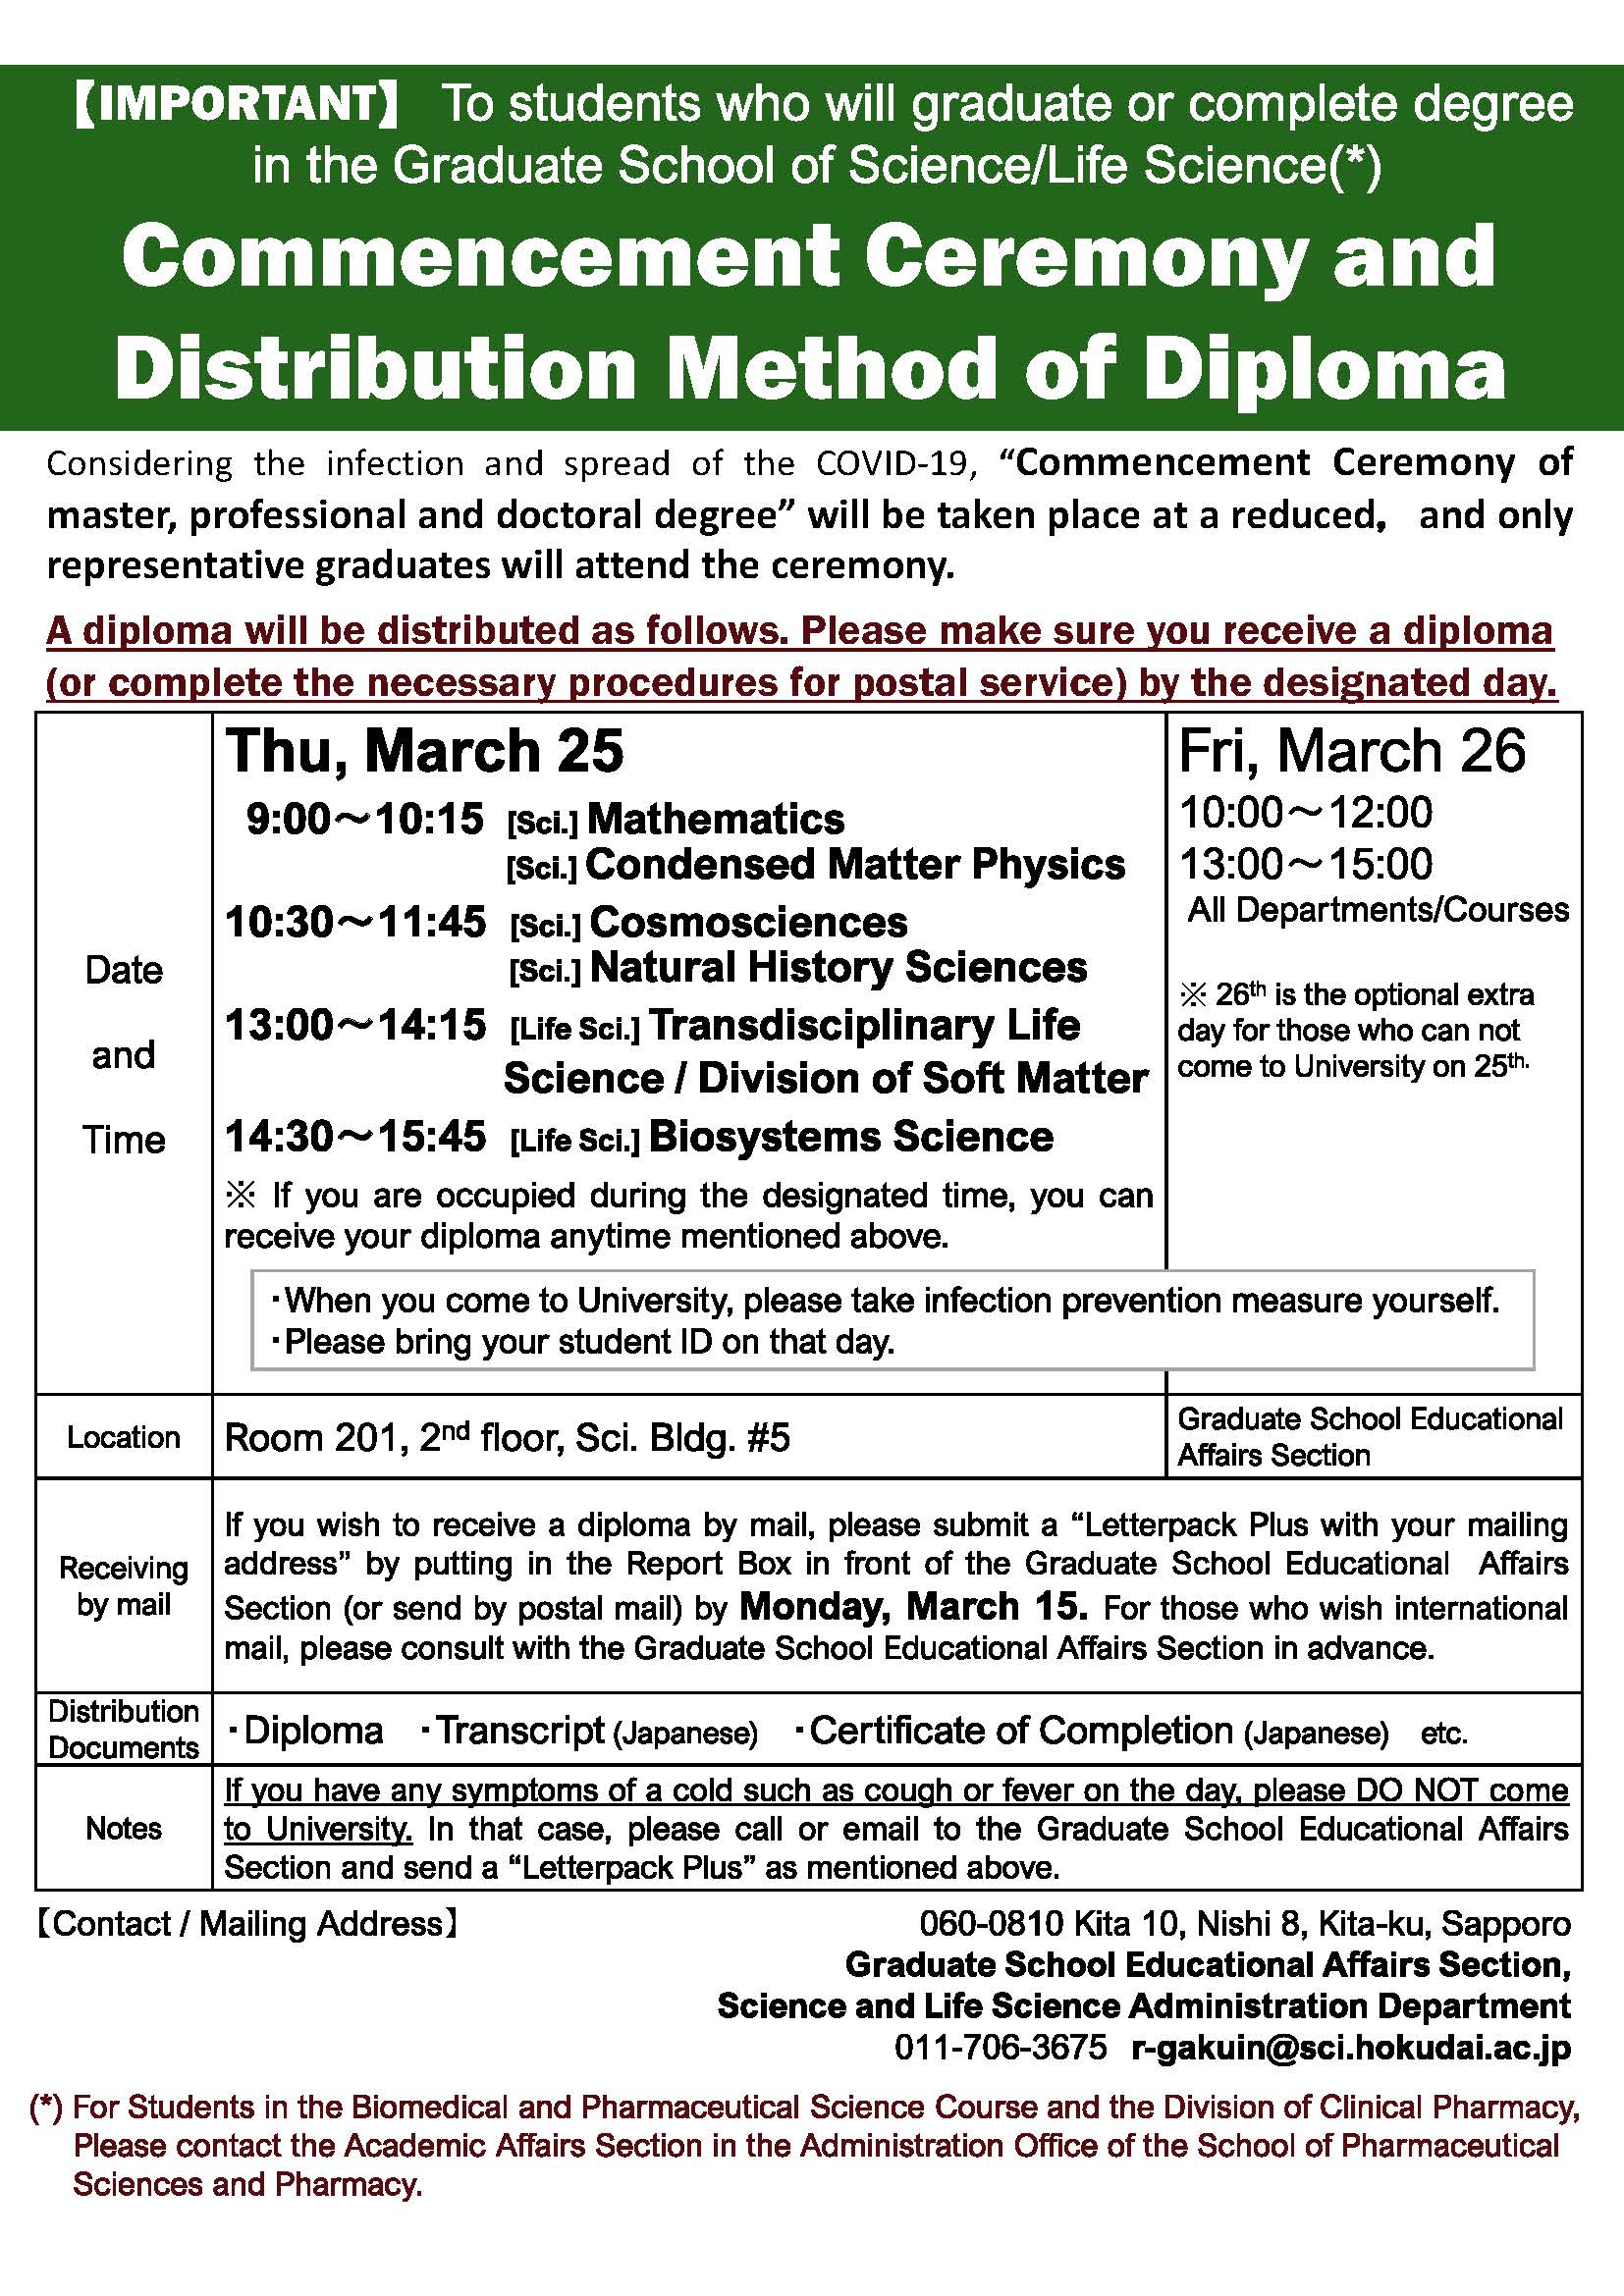 Commencement Ceremony and Distribution Method of Diploma